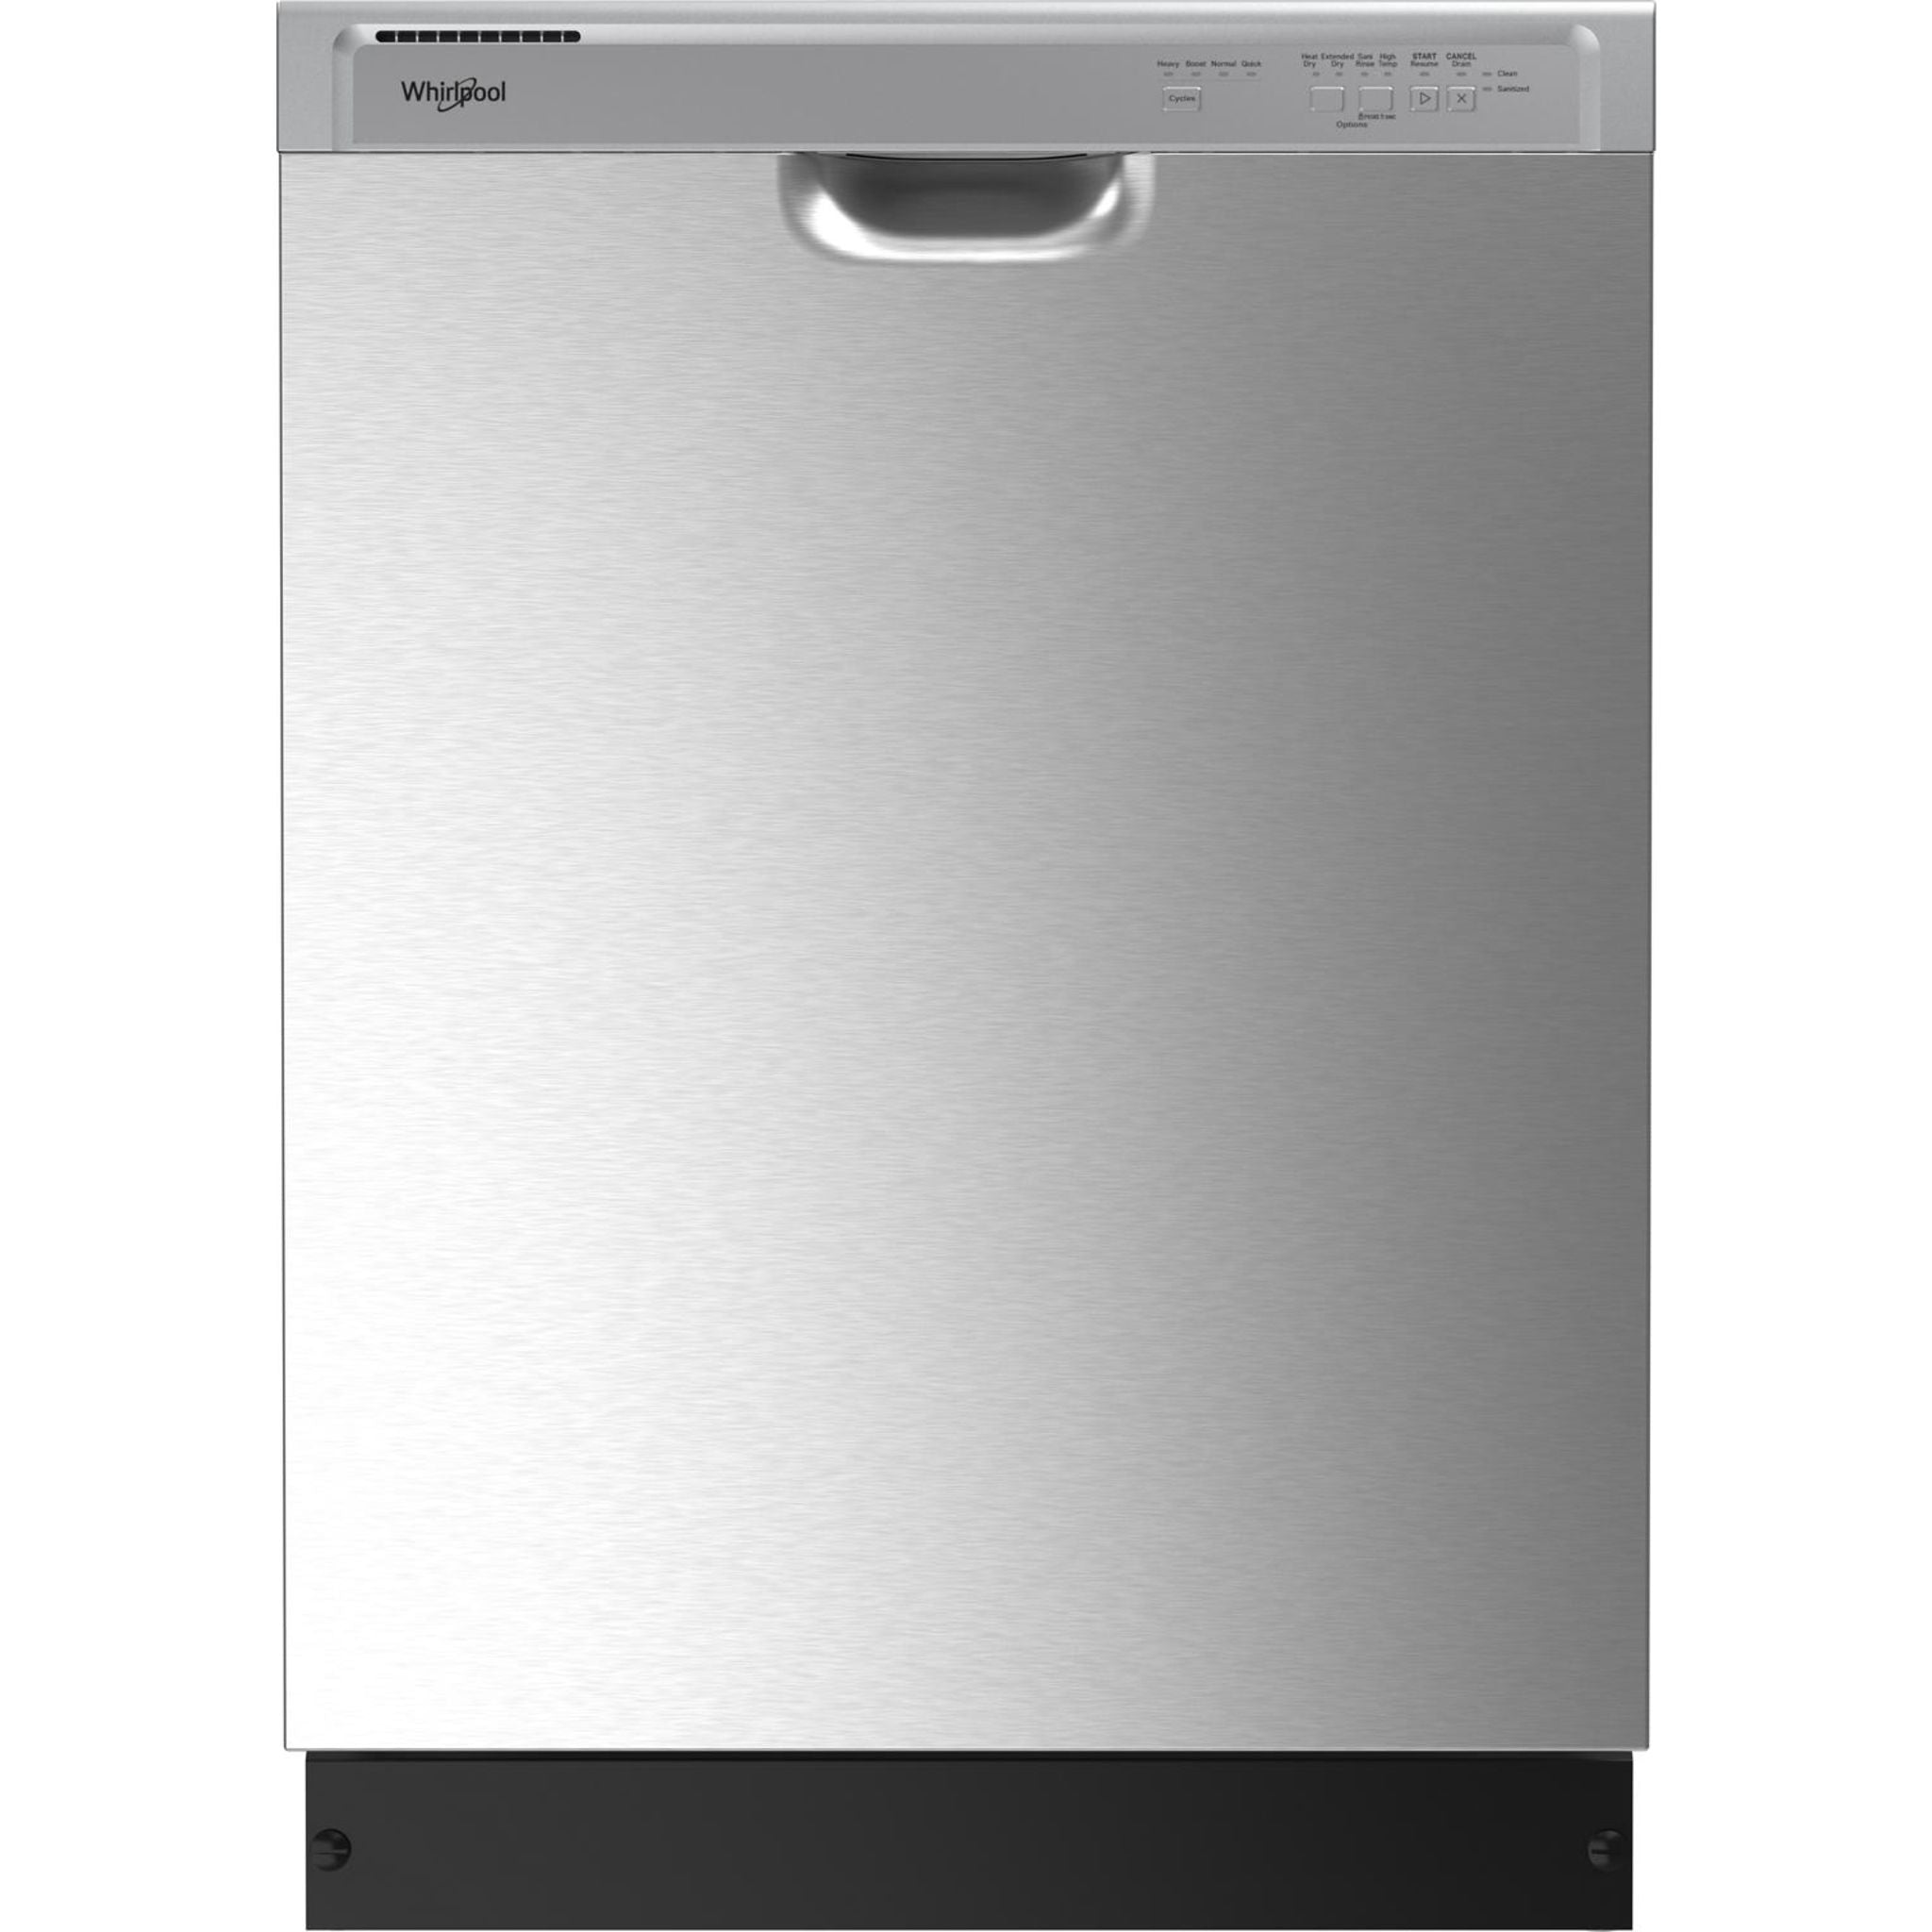 Whirlpool, Dishwasher (WDF341PAPM) - Stainless Steel